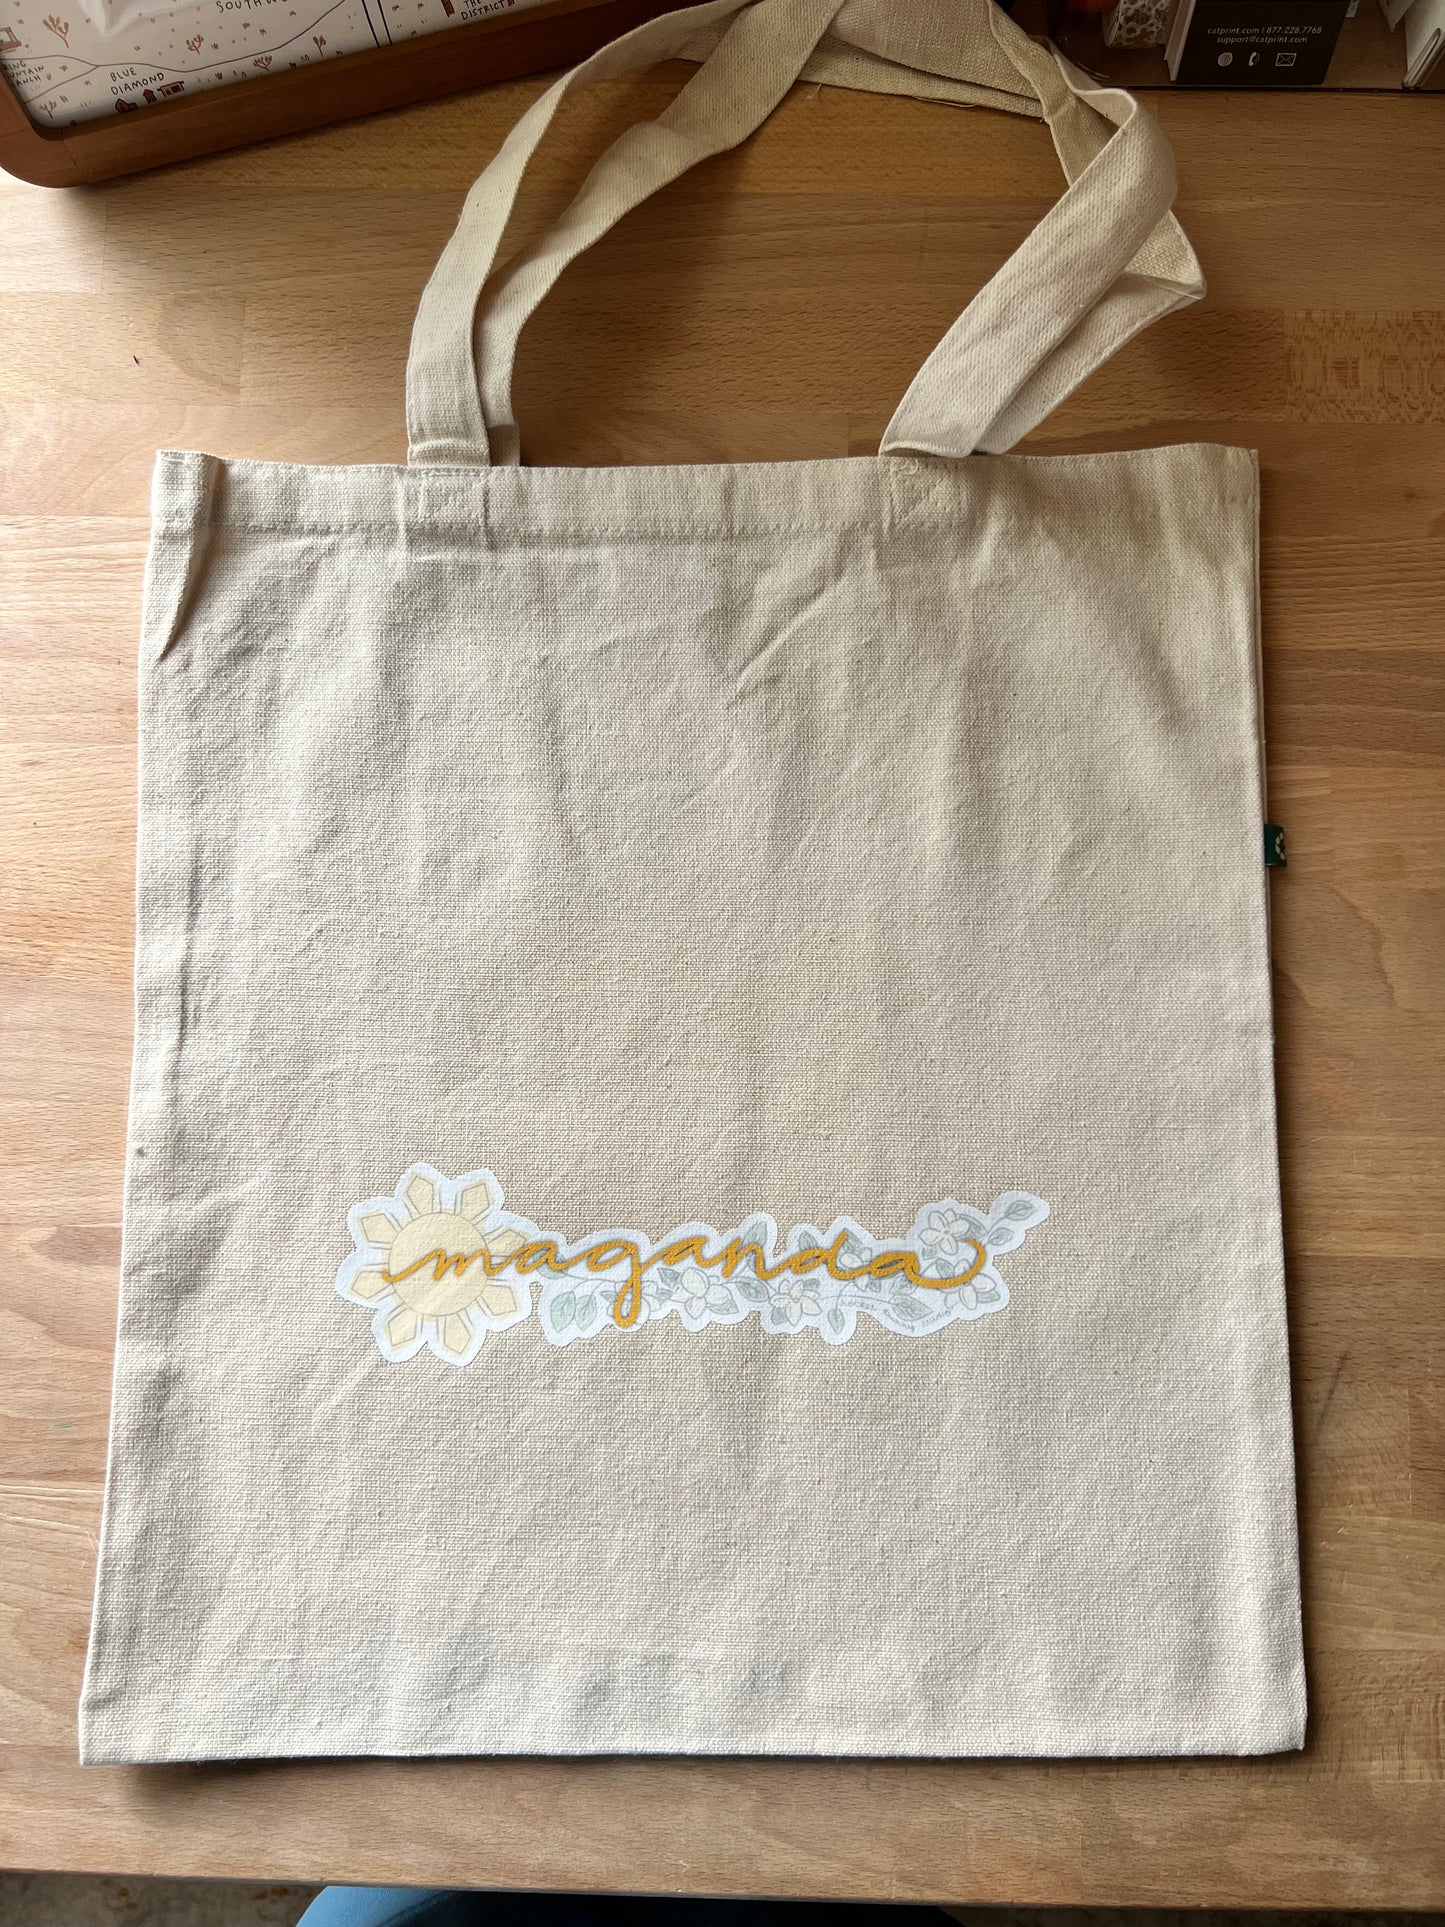 Filipino-American Recycled Canvas Tote Bag